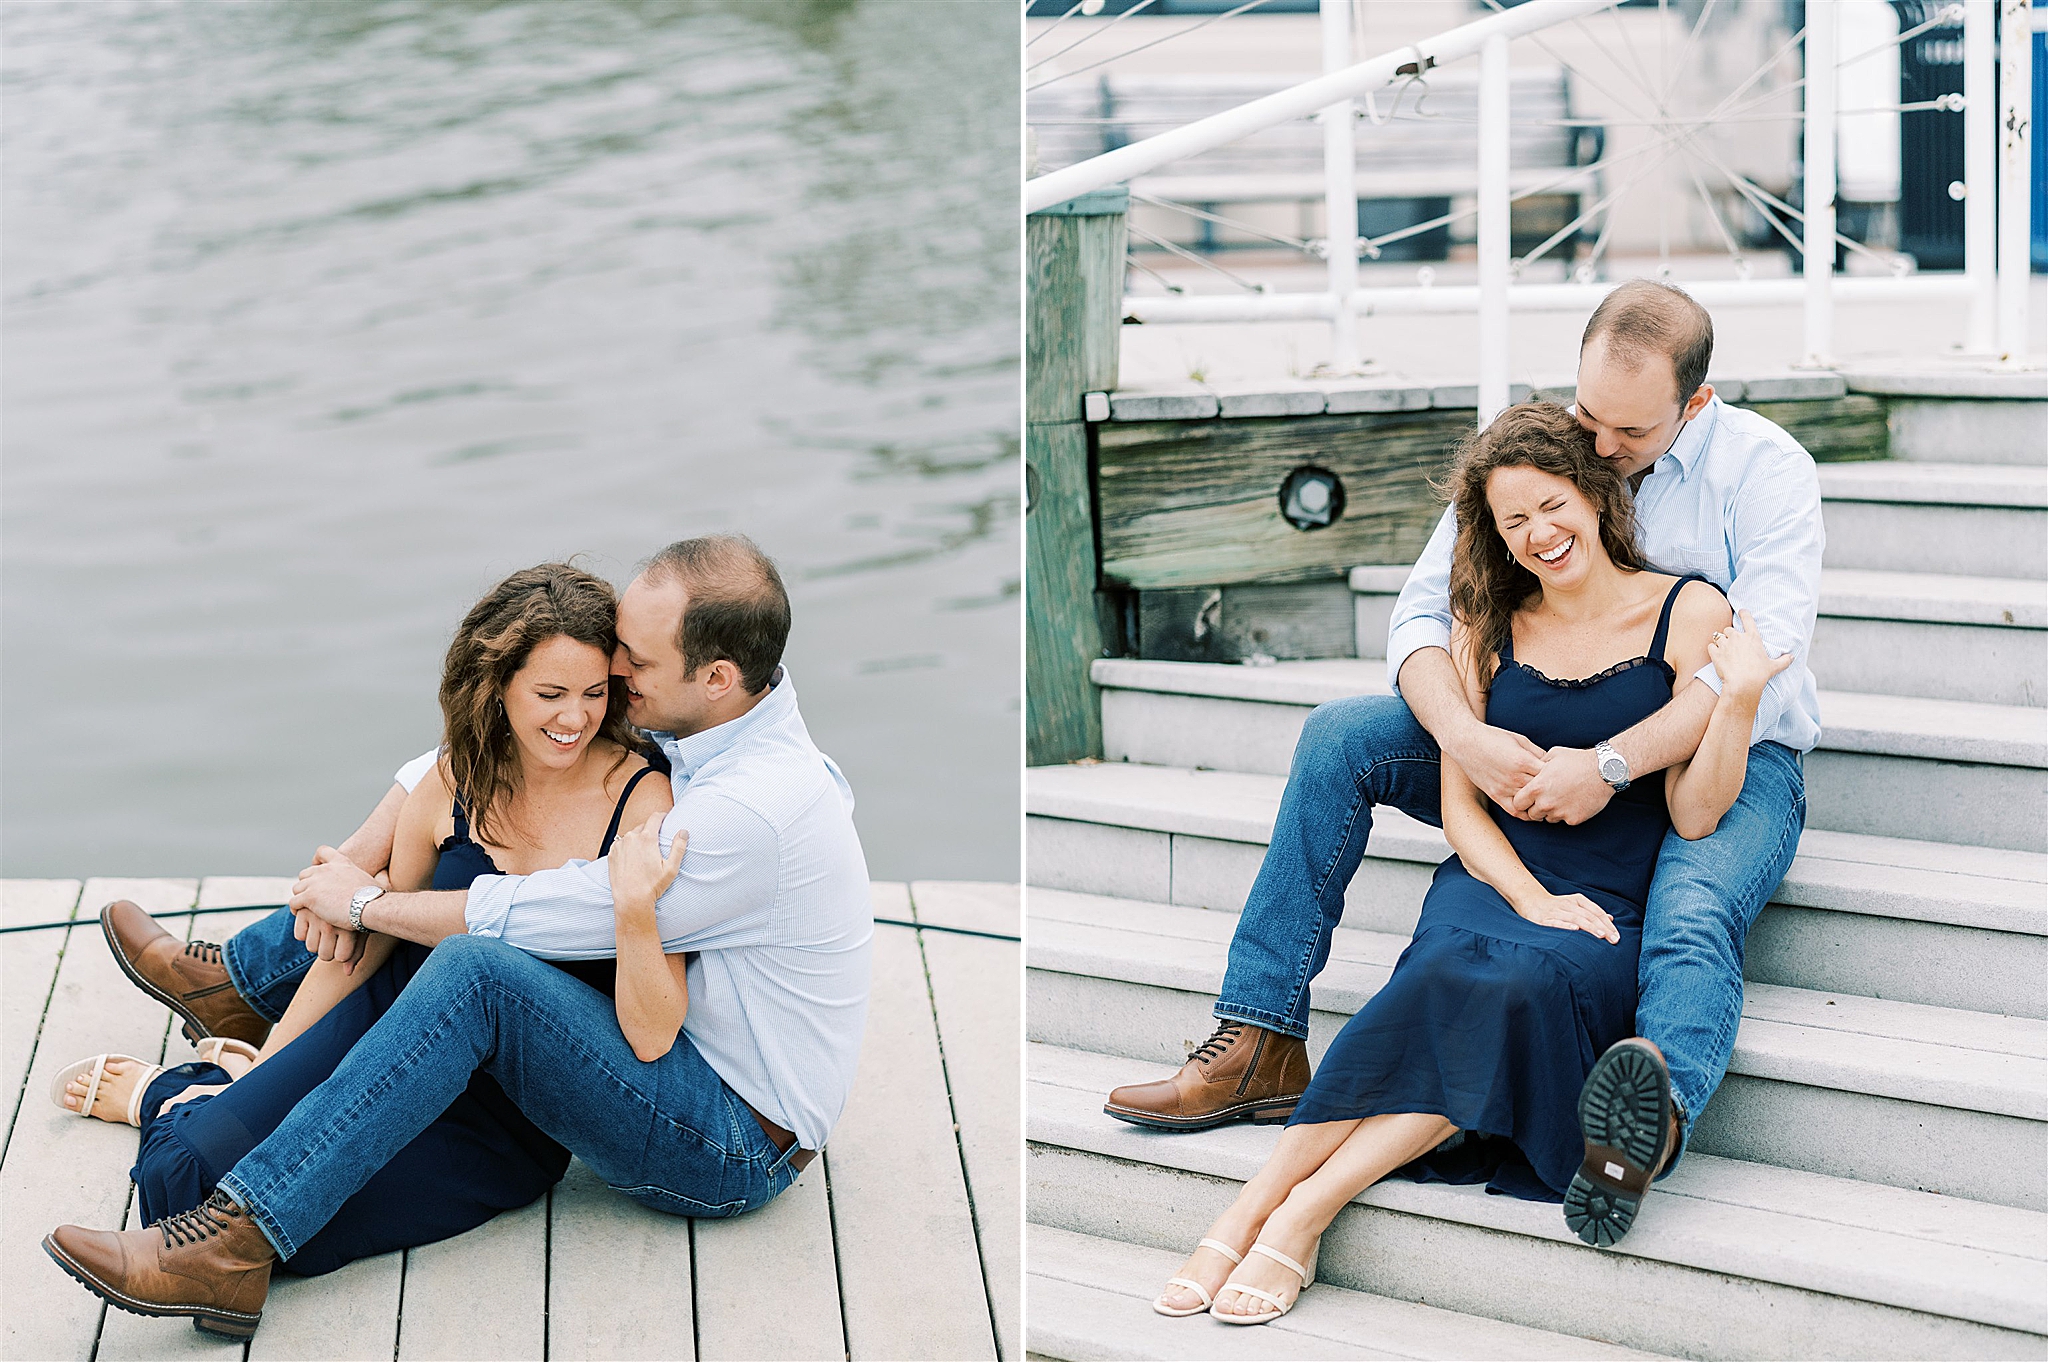 waterfront engagement portraits in Northern VA